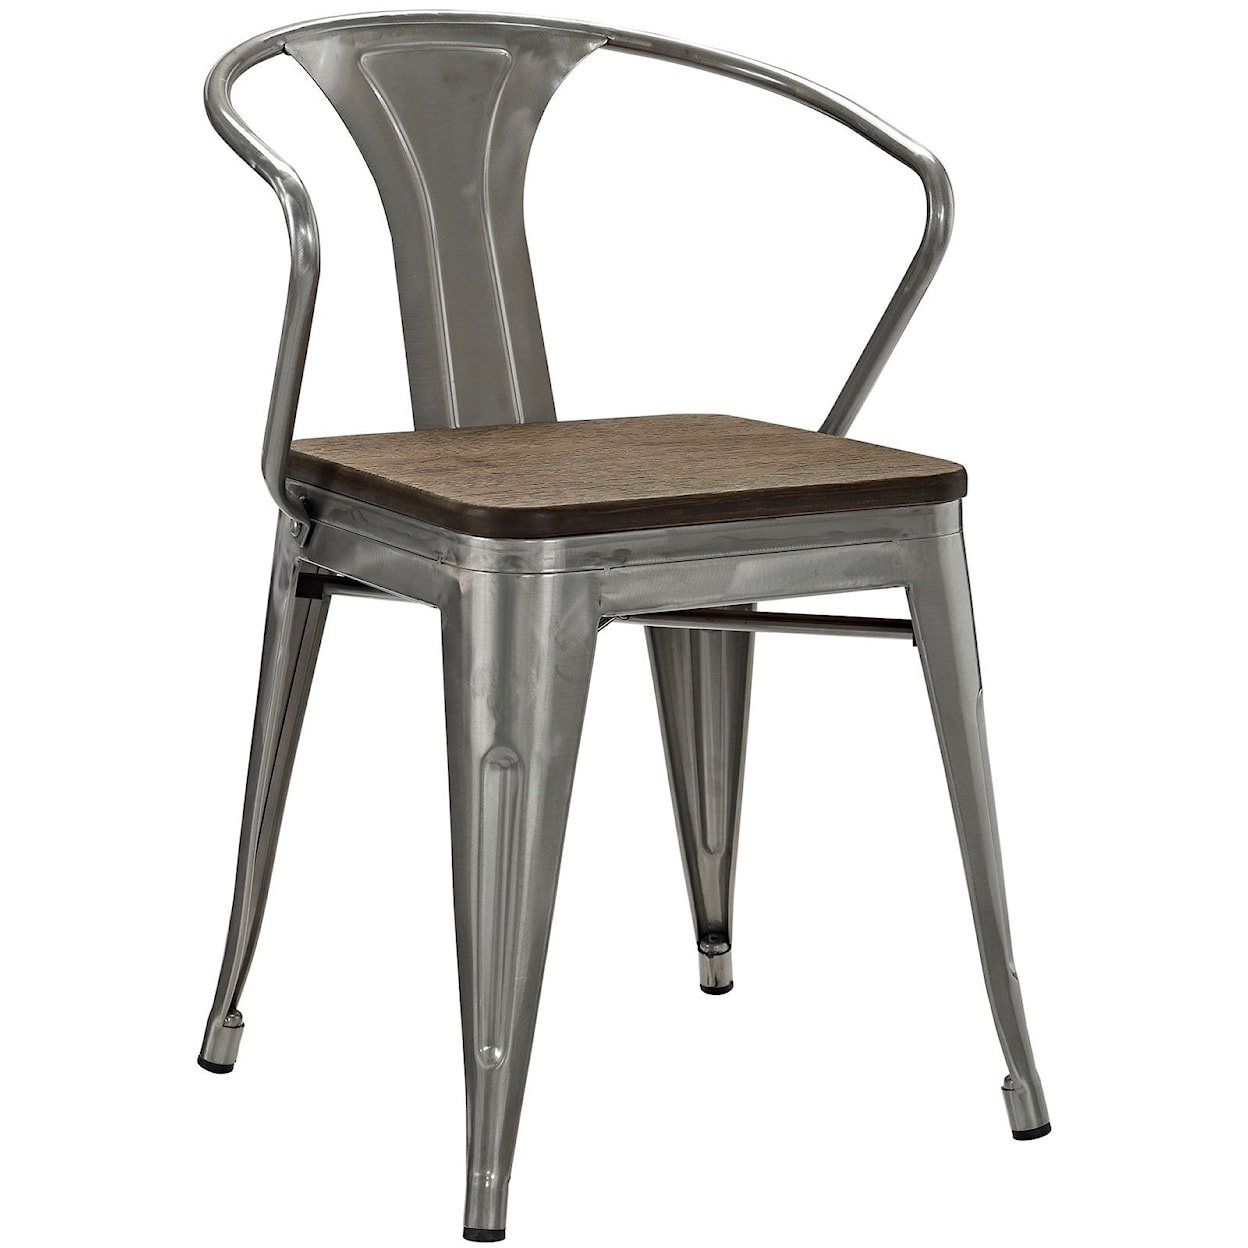 Modway Promenade Bamboo Dining Chair